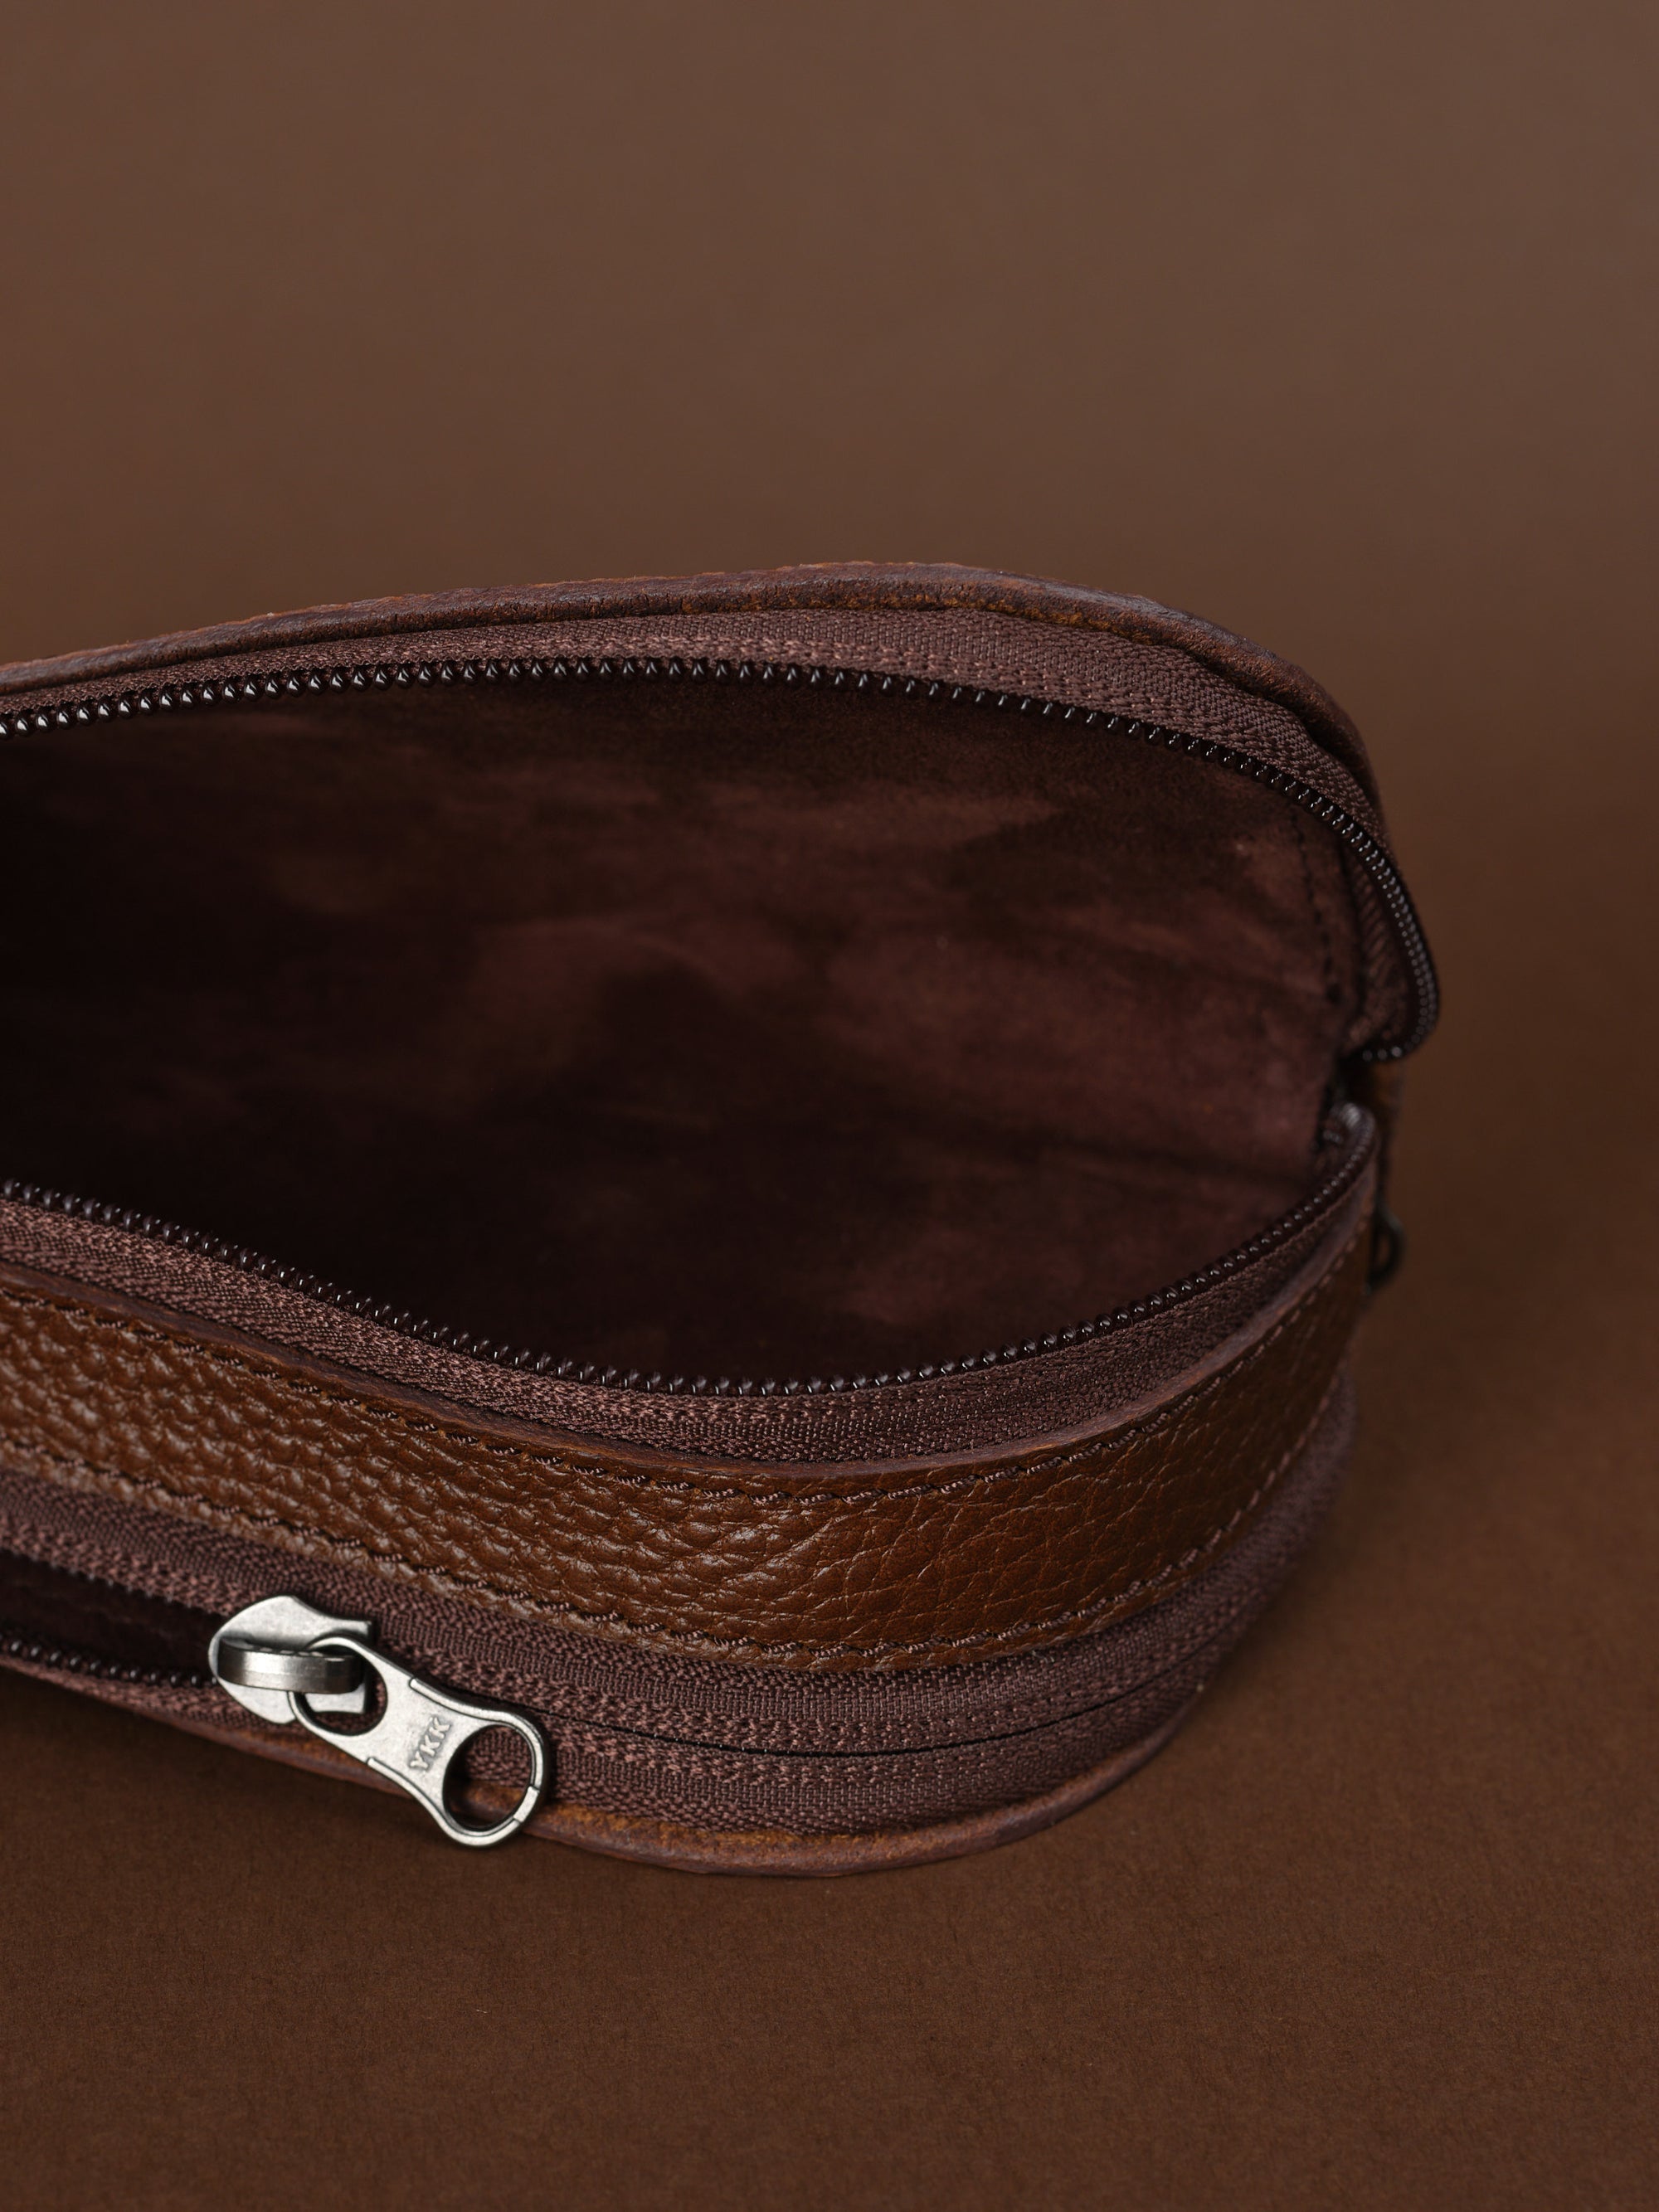 leather double eyeglass case brown by Capra